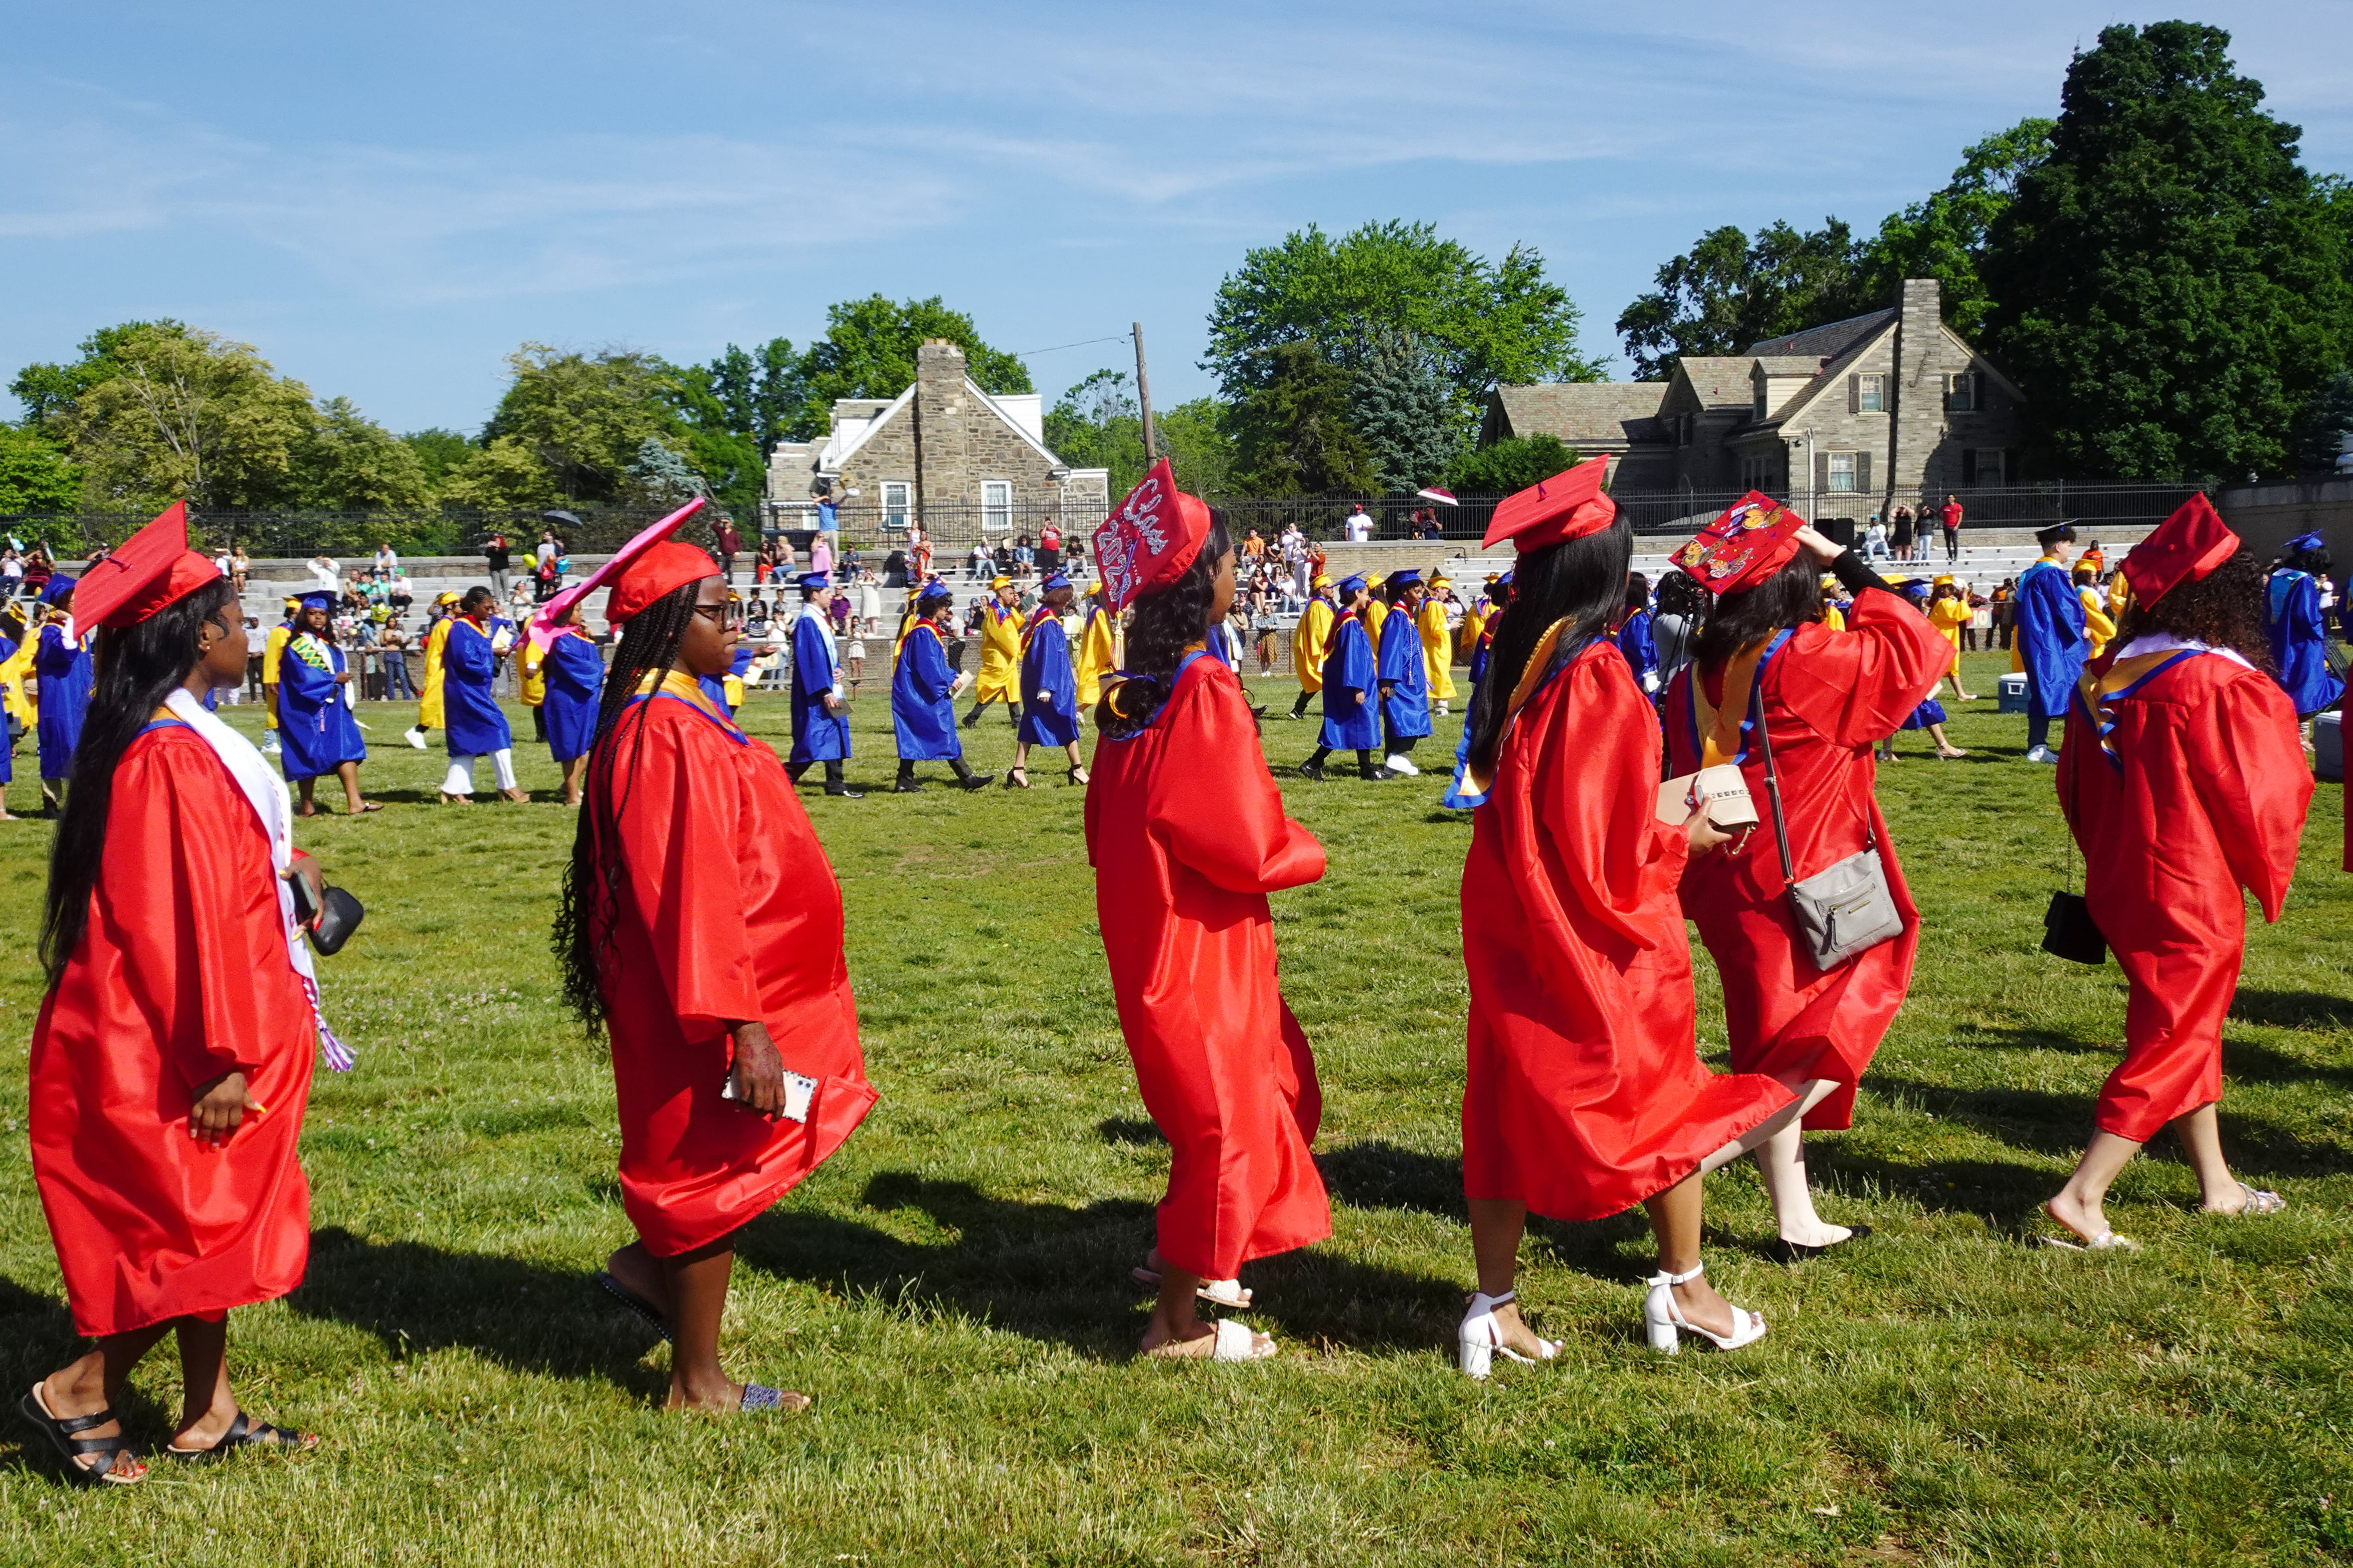 High school graduates in red gowns line up outside on a green grassy field with blue sky in the background.